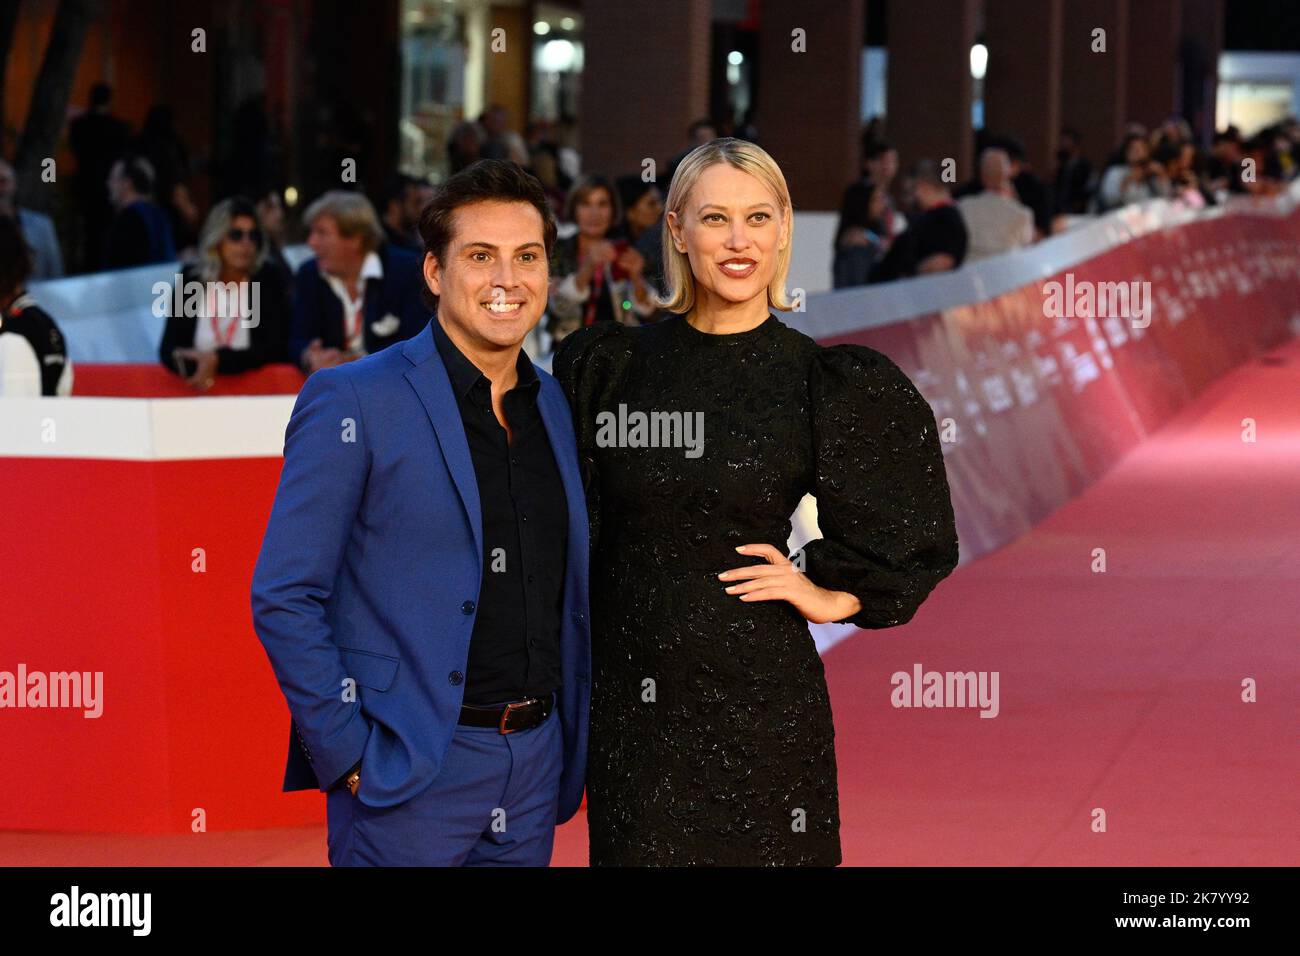 Roma, Italy. 18th Oct, 2022. ROME, ITALY - OCTOBER 18: Vincenzo Bocciarelli and Lea Mornar attends the photocall for 'La California' during the 17th Rome Film Festival at Auditorium Parco Della Musica on October 18, 2022 in Rome, Italy. Credit: Independent Photo Agency/Alamy Live News Stock Photo